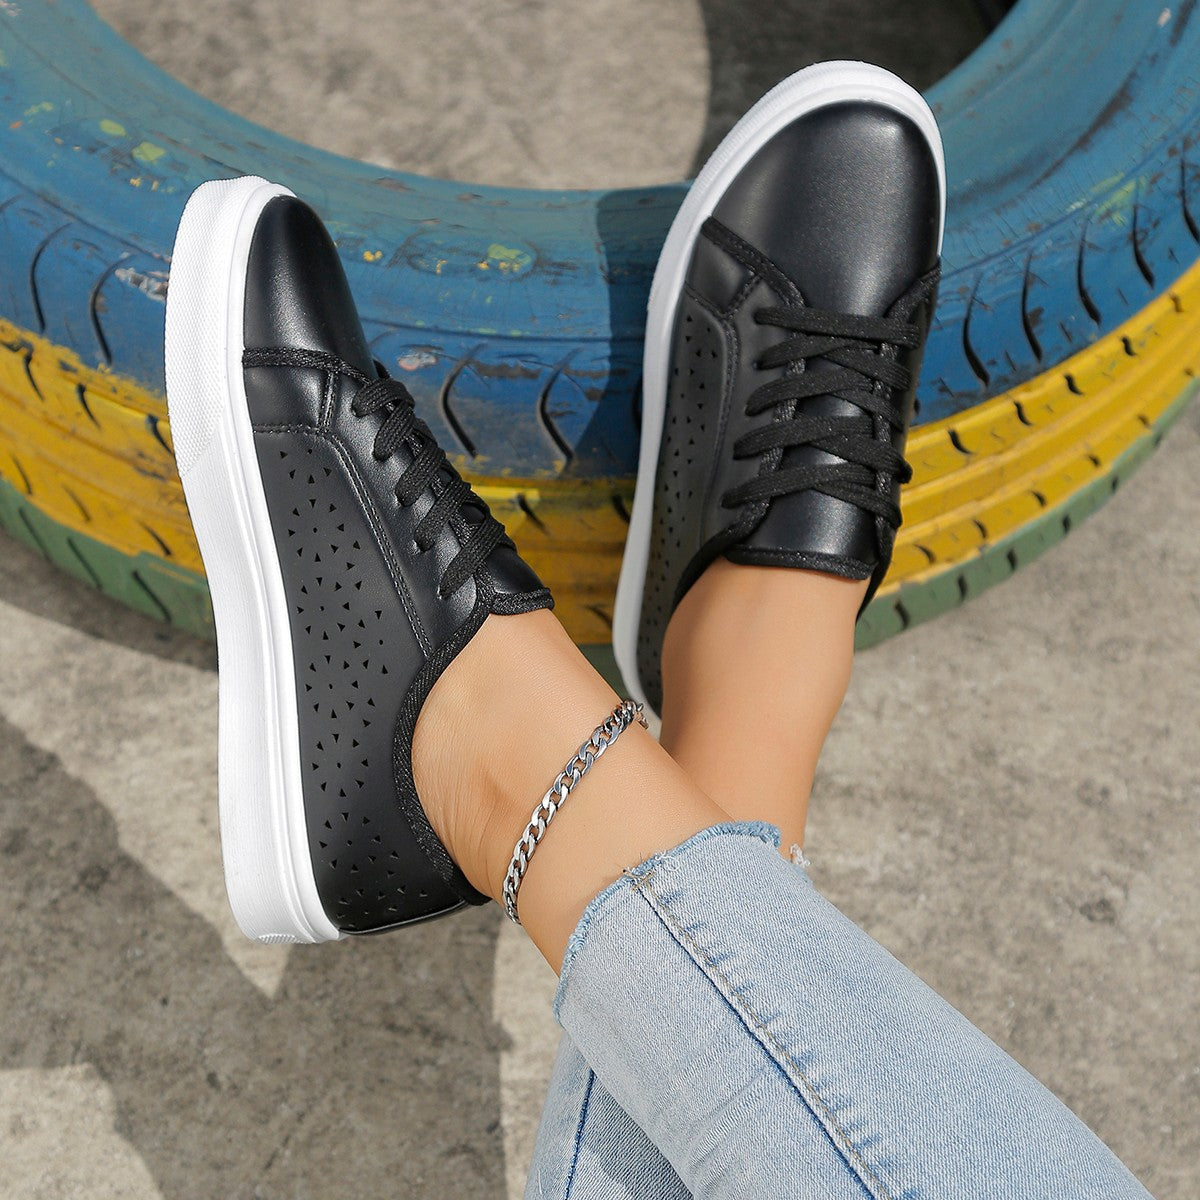 sneakers  | Cutout Flat Shoes Lace-up Hollow Out Walking Shoes For Women Loafers | Black |  36.| thecurvestory.myshopify.com